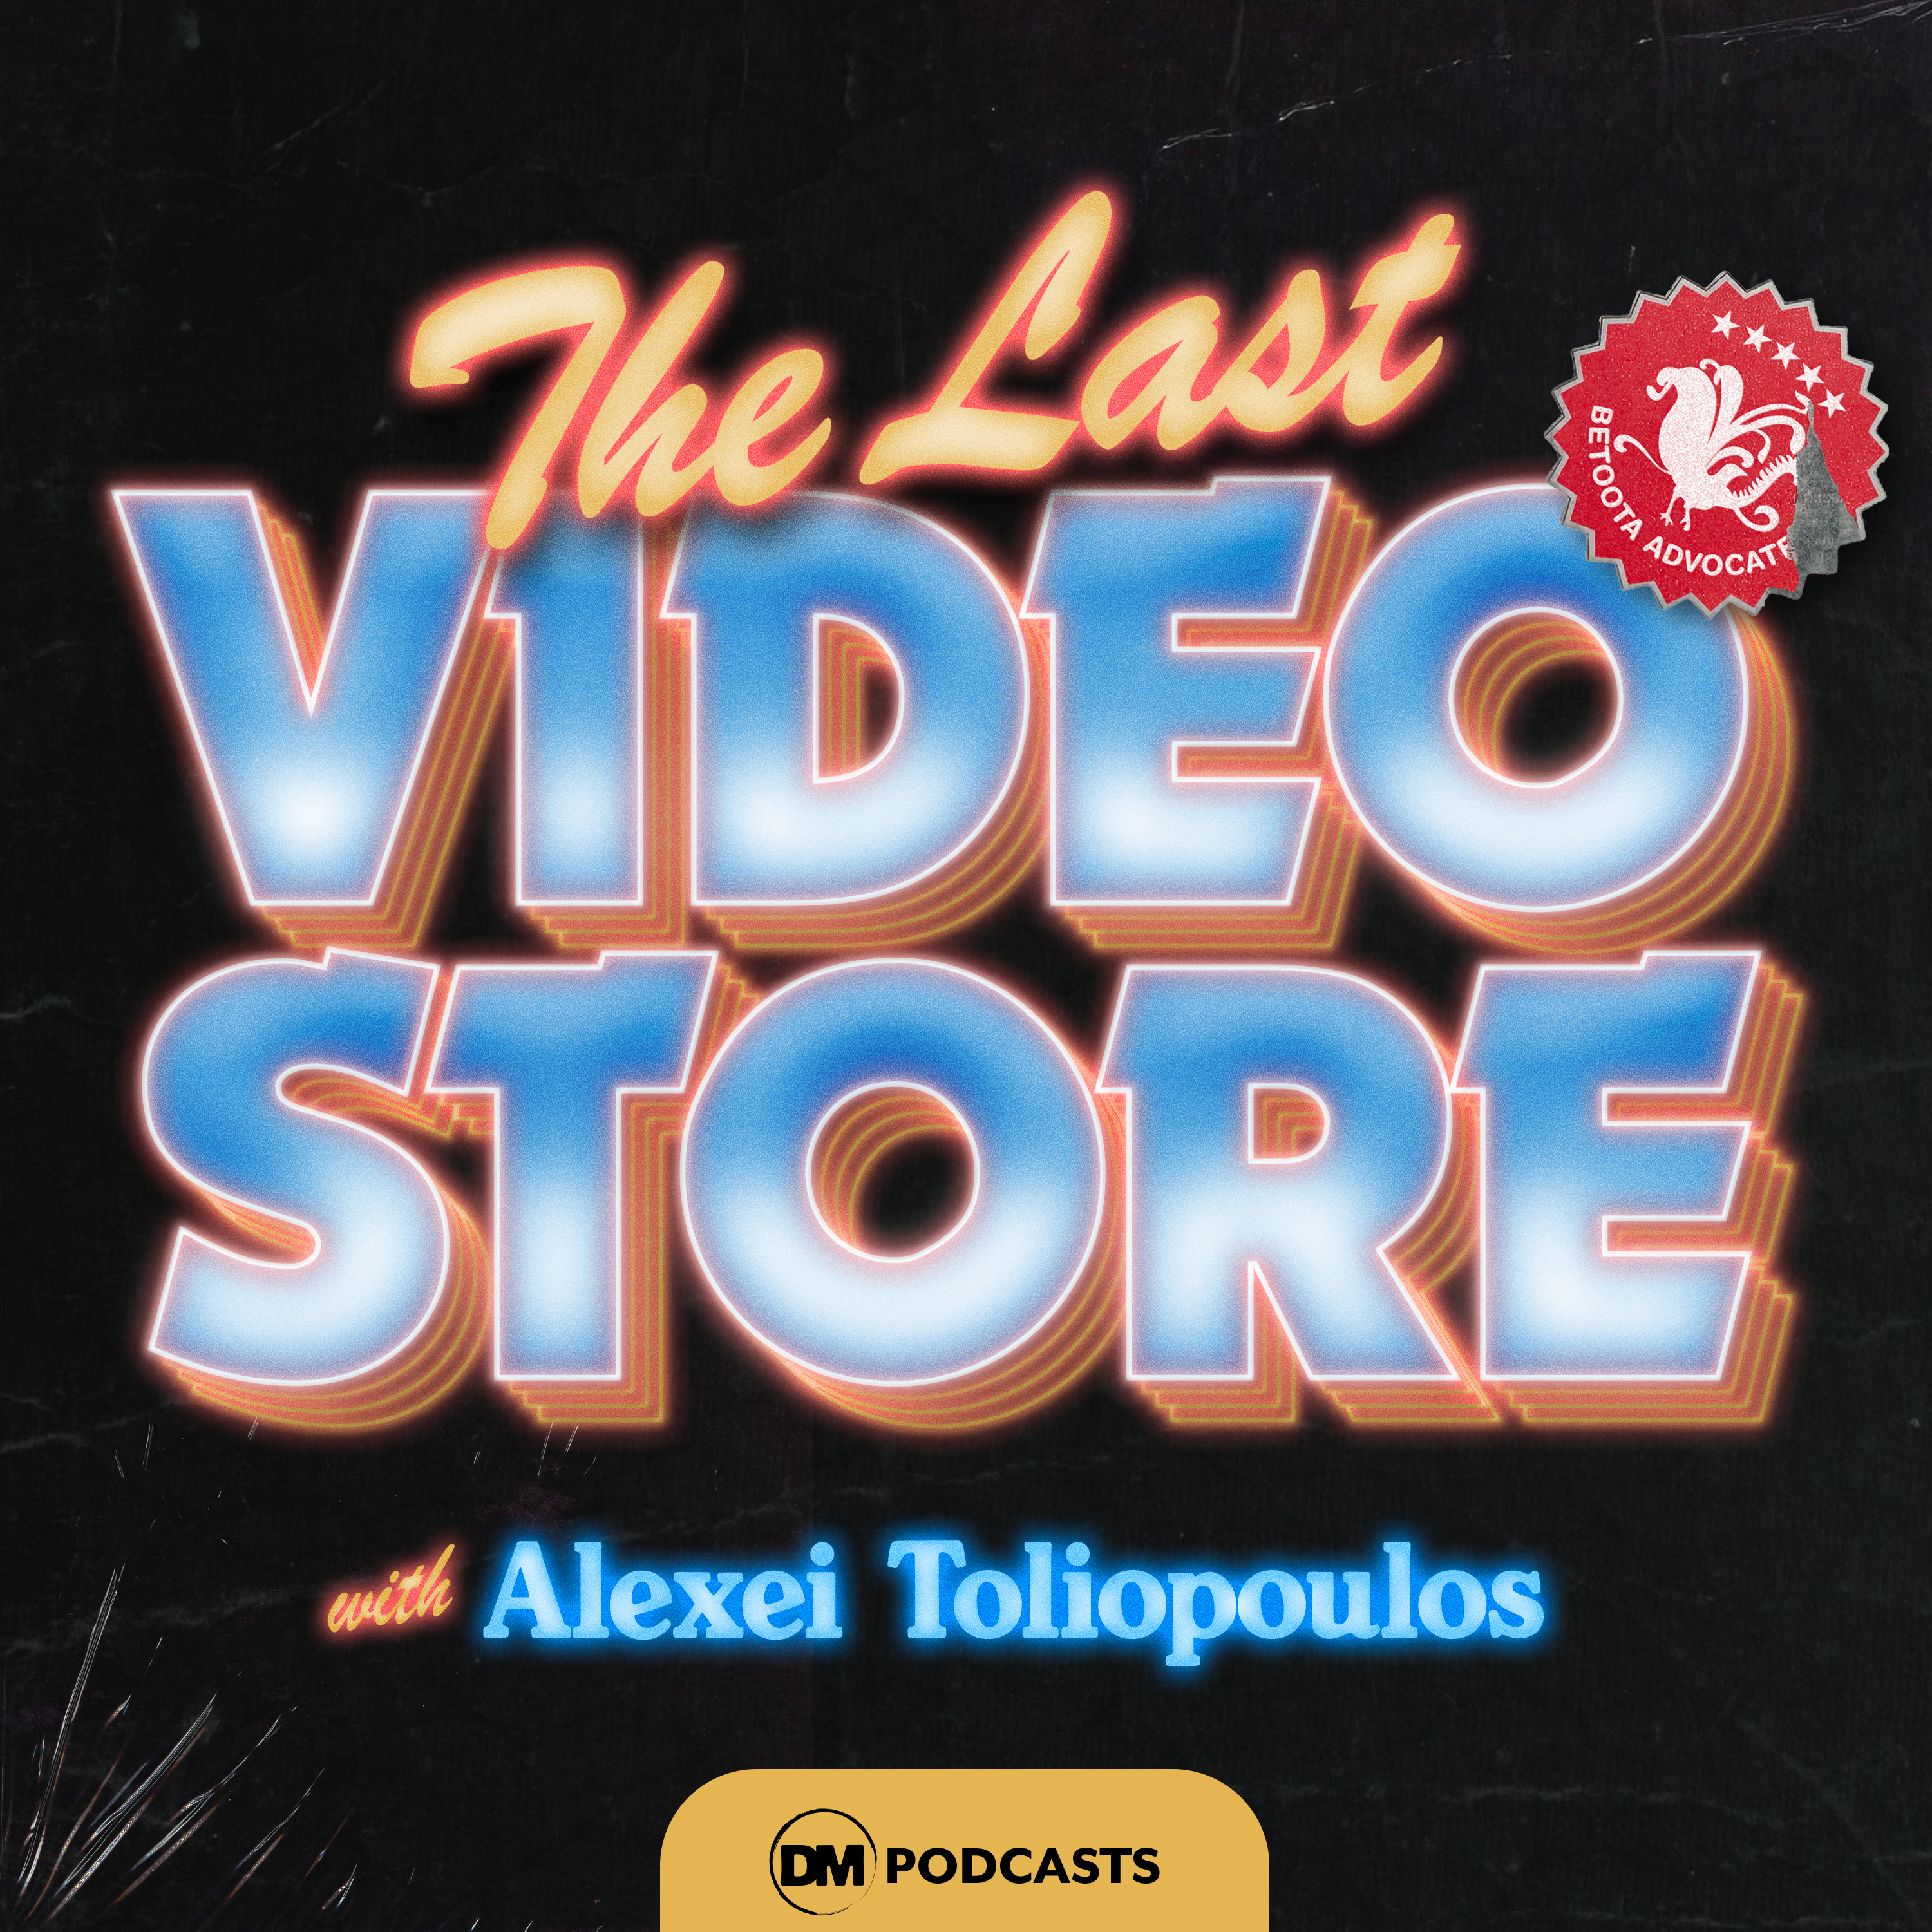 NEW PODCAST: The Last Video Store In Betoota (feat. Troy Cassar-Daley)